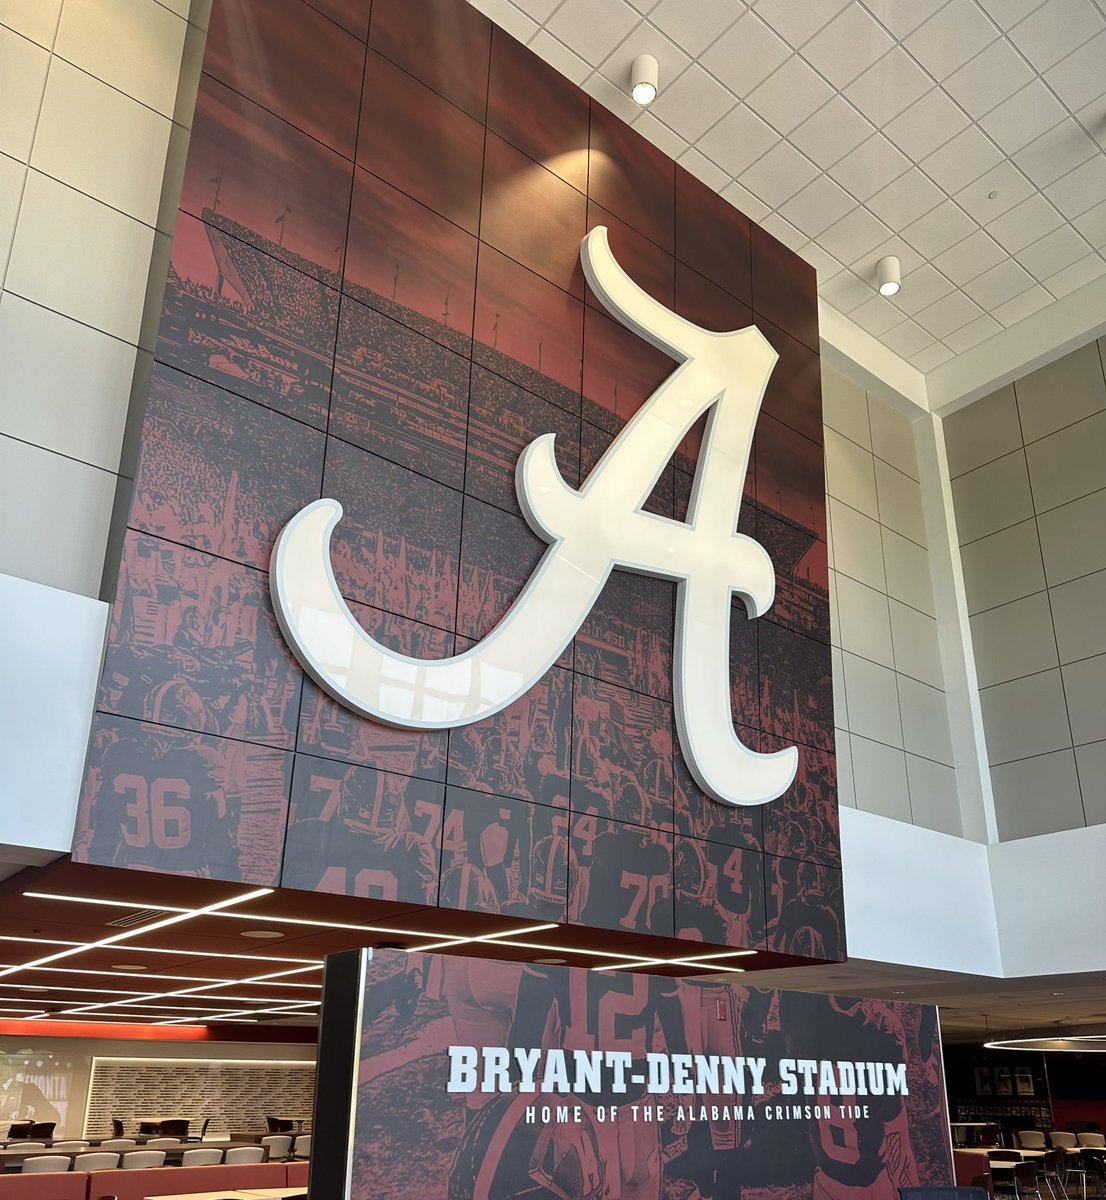 We thank Alabama football personnel for sharing Crimson Tide culture with us today. Honored to be building with this program. #RollTide + #TrackingFootball